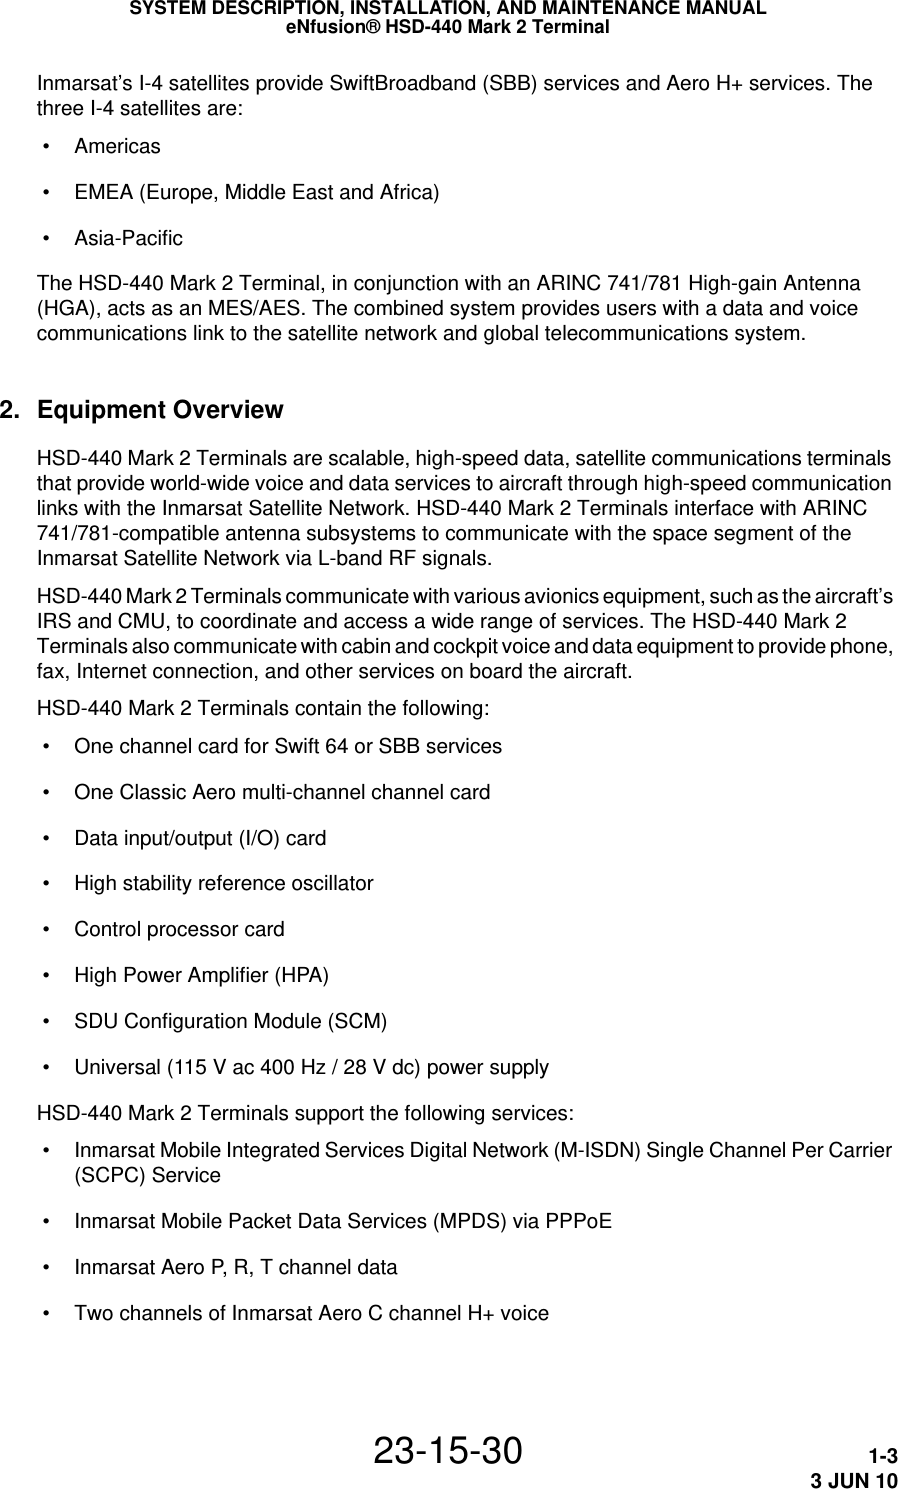 SYSTEM DESCRIPTION, INSTALLATION, AND MAINTENANCE MANUALeNfusion® HSD-440 Mark 2 Terminal23-15-30 1-33 JUN 10Inmarsat’s I-4 satellites provide SwiftBroadband (SBB) services and Aero H+ services. The three I-4 satellites are: • Americas • EMEA (Europe, Middle East and Africa) • Asia-PacificThe HSD-440 Mark 2 Terminal, in conjunction with an ARINC 741/781 High-gain Antenna (HGA), acts as an MES/AES. The combined system provides users with a data and voice communications link to the satellite network and global telecommunications system.2. Equipment OverviewHSD-440 Mark 2 Terminals are scalable, high-speed data, satellite communications terminals that provide world-wide voice and data services to aircraft through high-speed communication links with the Inmarsat Satellite Network. HSD-440 Mark 2 Terminals interface with ARINC 741/781-compatible antenna subsystems to communicate with the space segment of the Inmarsat Satellite Network via L-band RF signals.HSD-440 Mark 2 Terminals communicate with various avionics equipment, such as the aircraft’s IRS and CMU, to coordinate and access a wide range of services. The HSD-440 Mark 2 Terminals also communicate with cabin and cockpit voice and data equipment to provide phone, fax, Internet connection, and other services on board the aircraft.HSD-440 Mark 2 Terminals contain the following: • One channel card for Swift 64 or SBB services • One Classic Aero multi-channel channel card • Data input/output (I/O) card • High stability reference oscillator • Control processor card • High Power Amplifier (HPA) • SDU Configuration Module (SCM) • Universal (115 V ac 400 Hz / 28 V dc) power supplyHSD-440 Mark 2 Terminals support the following services: • Inmarsat Mobile Integrated Services Digital Network (M-ISDN) Single Channel Per Carrier (SCPC) Service • Inmarsat Mobile Packet Data Services (MPDS) via PPPoE • Inmarsat Aero P, R, T channel data • Two channels of Inmarsat Aero C channel H+ voice